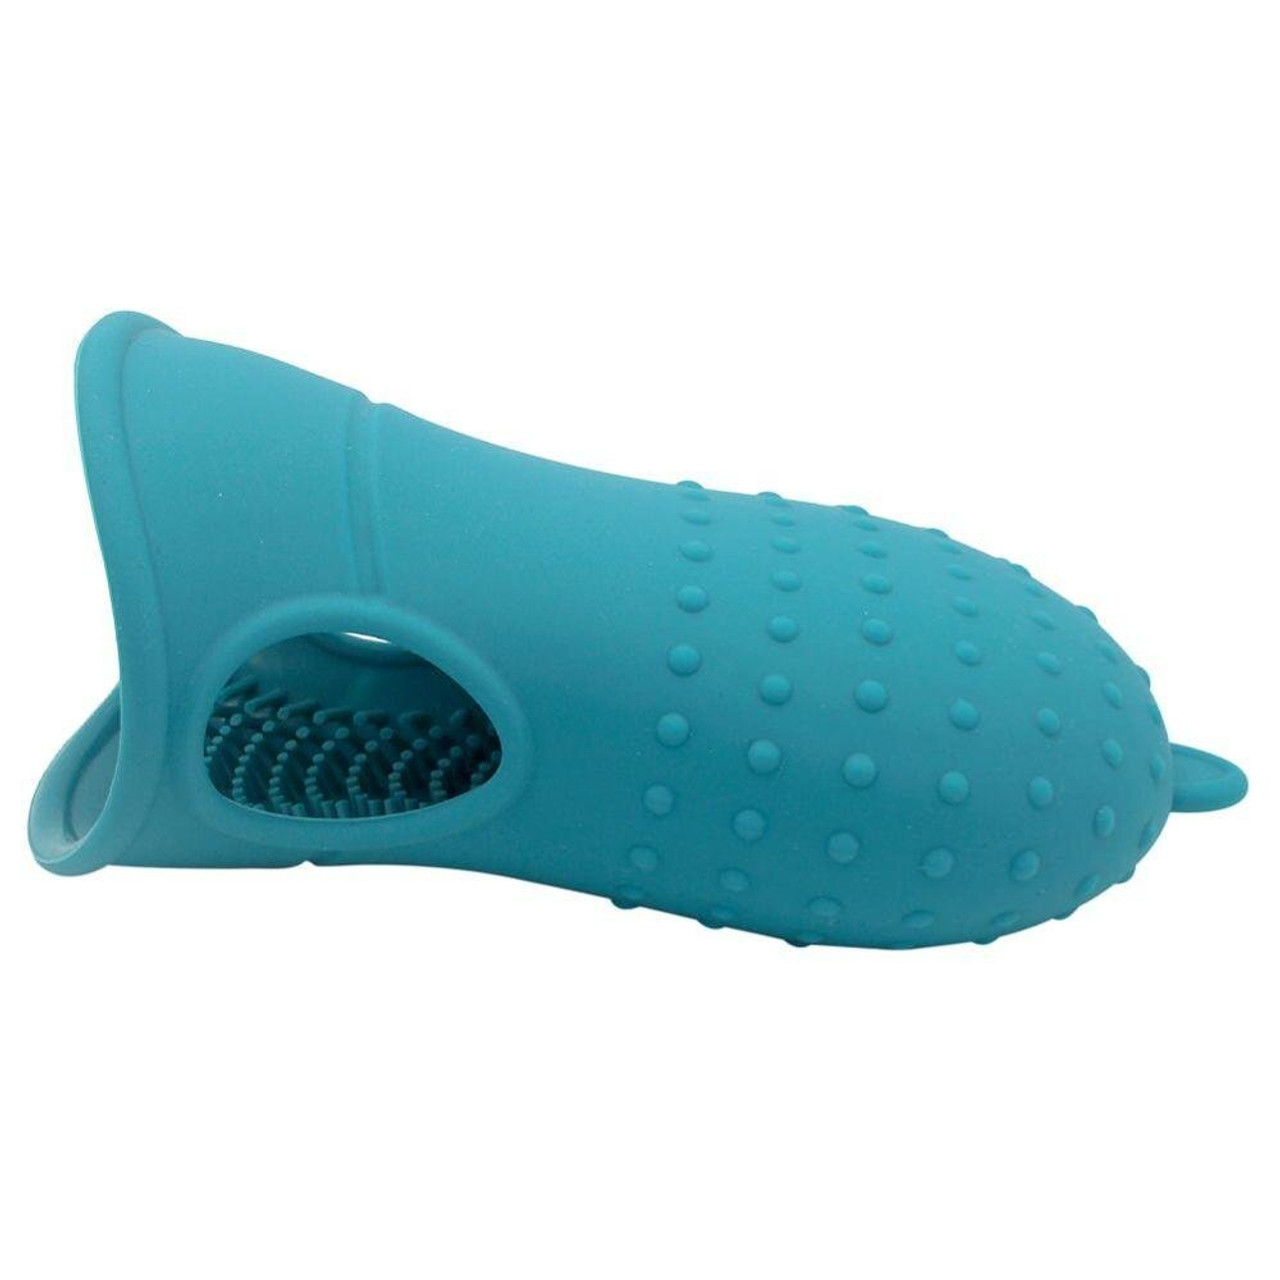 https://cdn11.bigcommerce.com/s-k9x28on8hb/images/stencil/1280x1280/products/123/456/dog-paw-cleaner-cup-soft-silicone-combs-portable-outdoor-pet-foot-washer-cup-paw-clean-brush-quickly-wash-foot-cleaning-bucket-438338__54464.1678487285.jpg?c=1